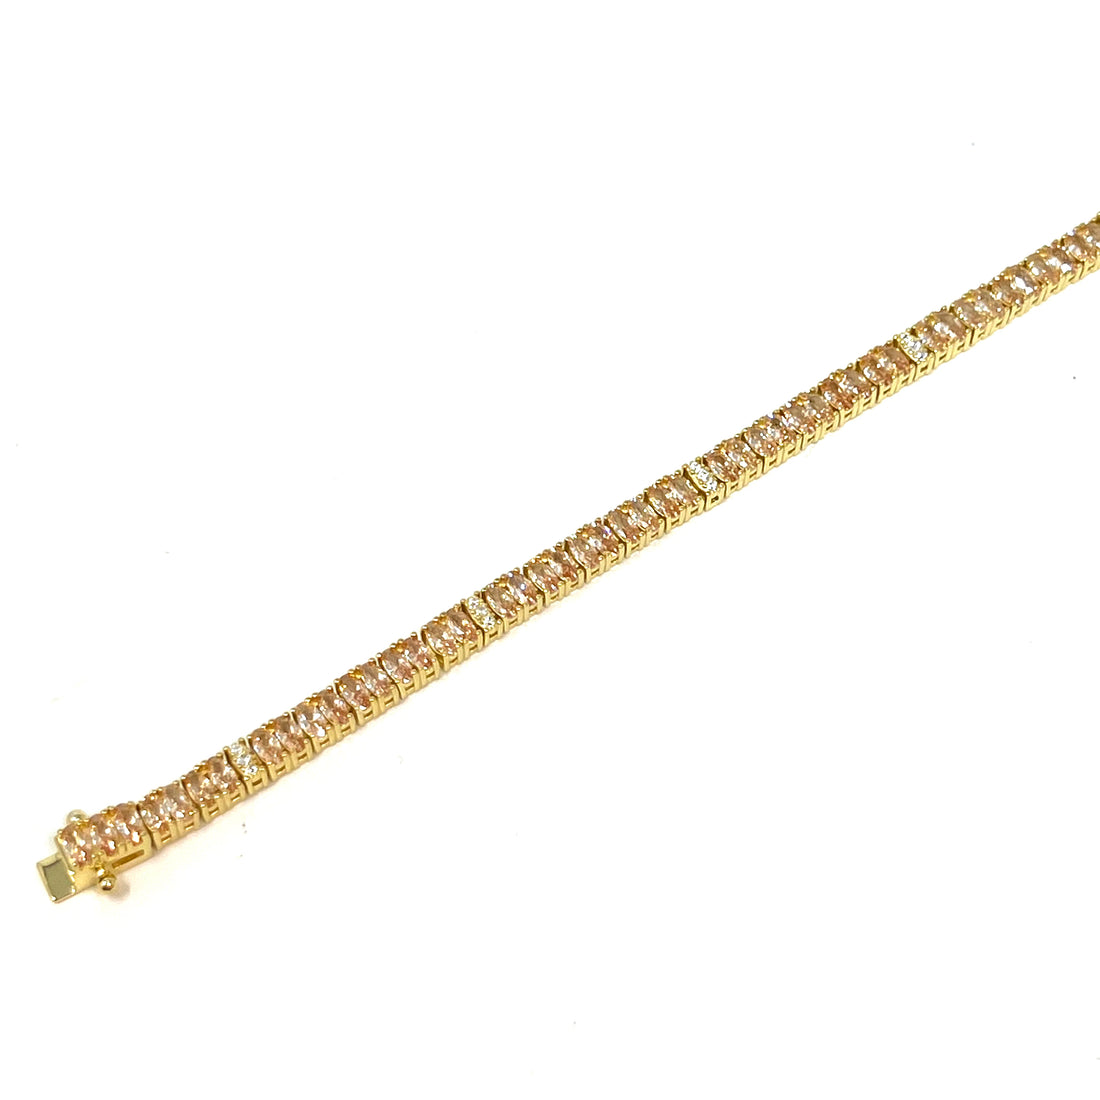 Carly Prong Set Tennis Bracelet in Champagne